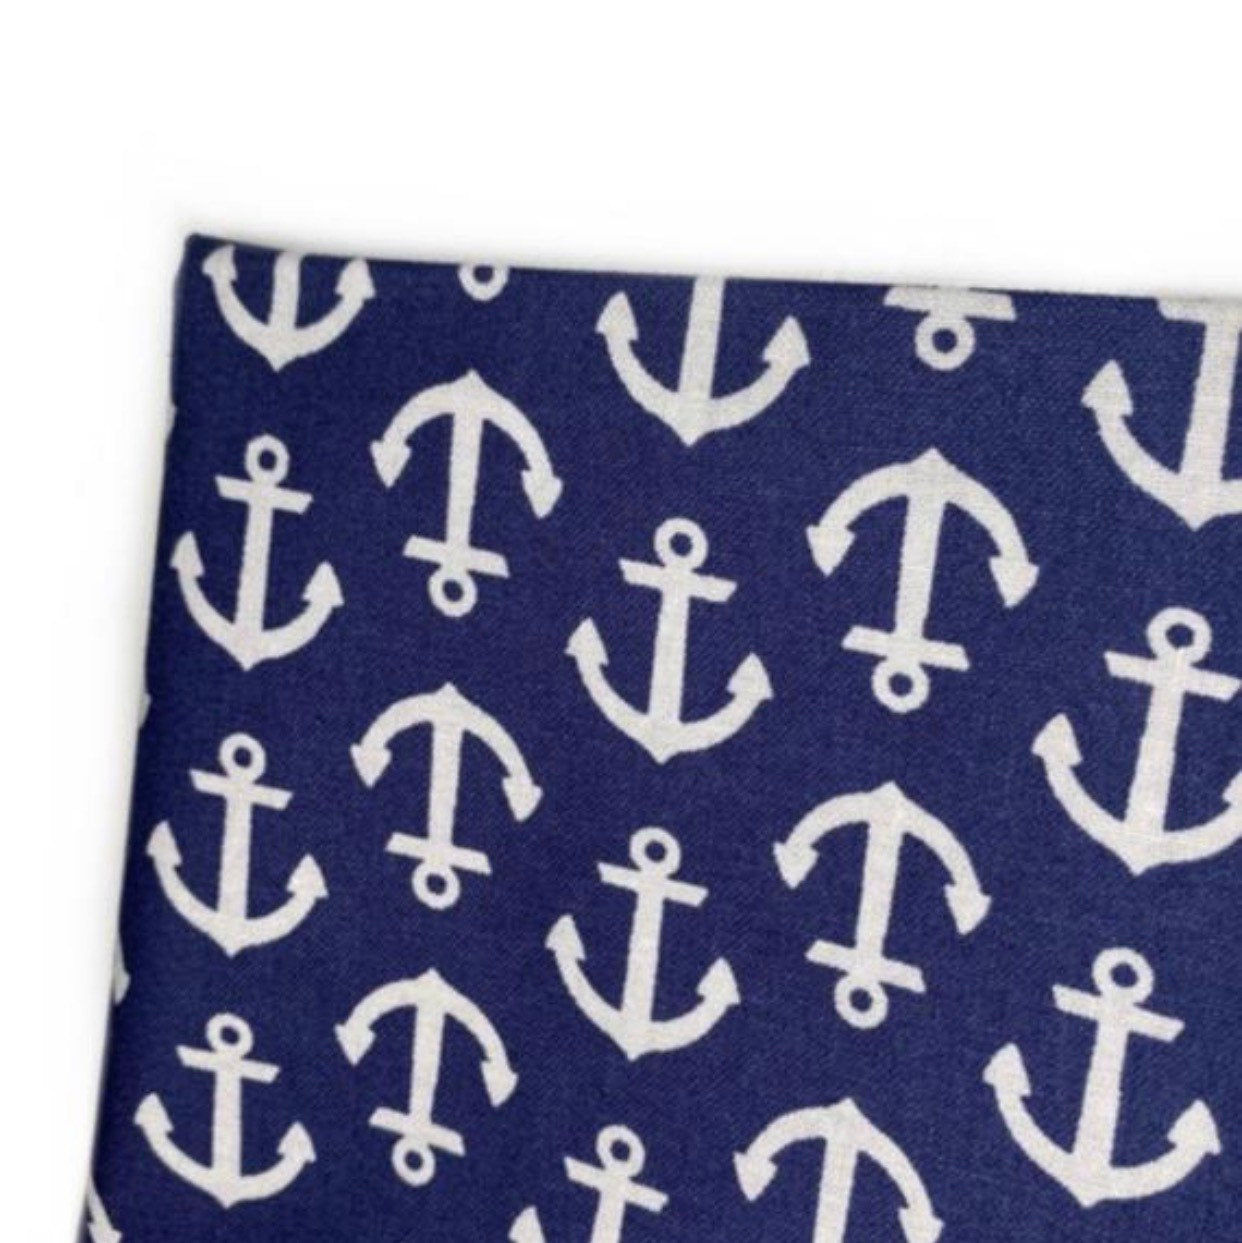 Quilting Cotton - Nautical Anchors - 44” - Navy/White